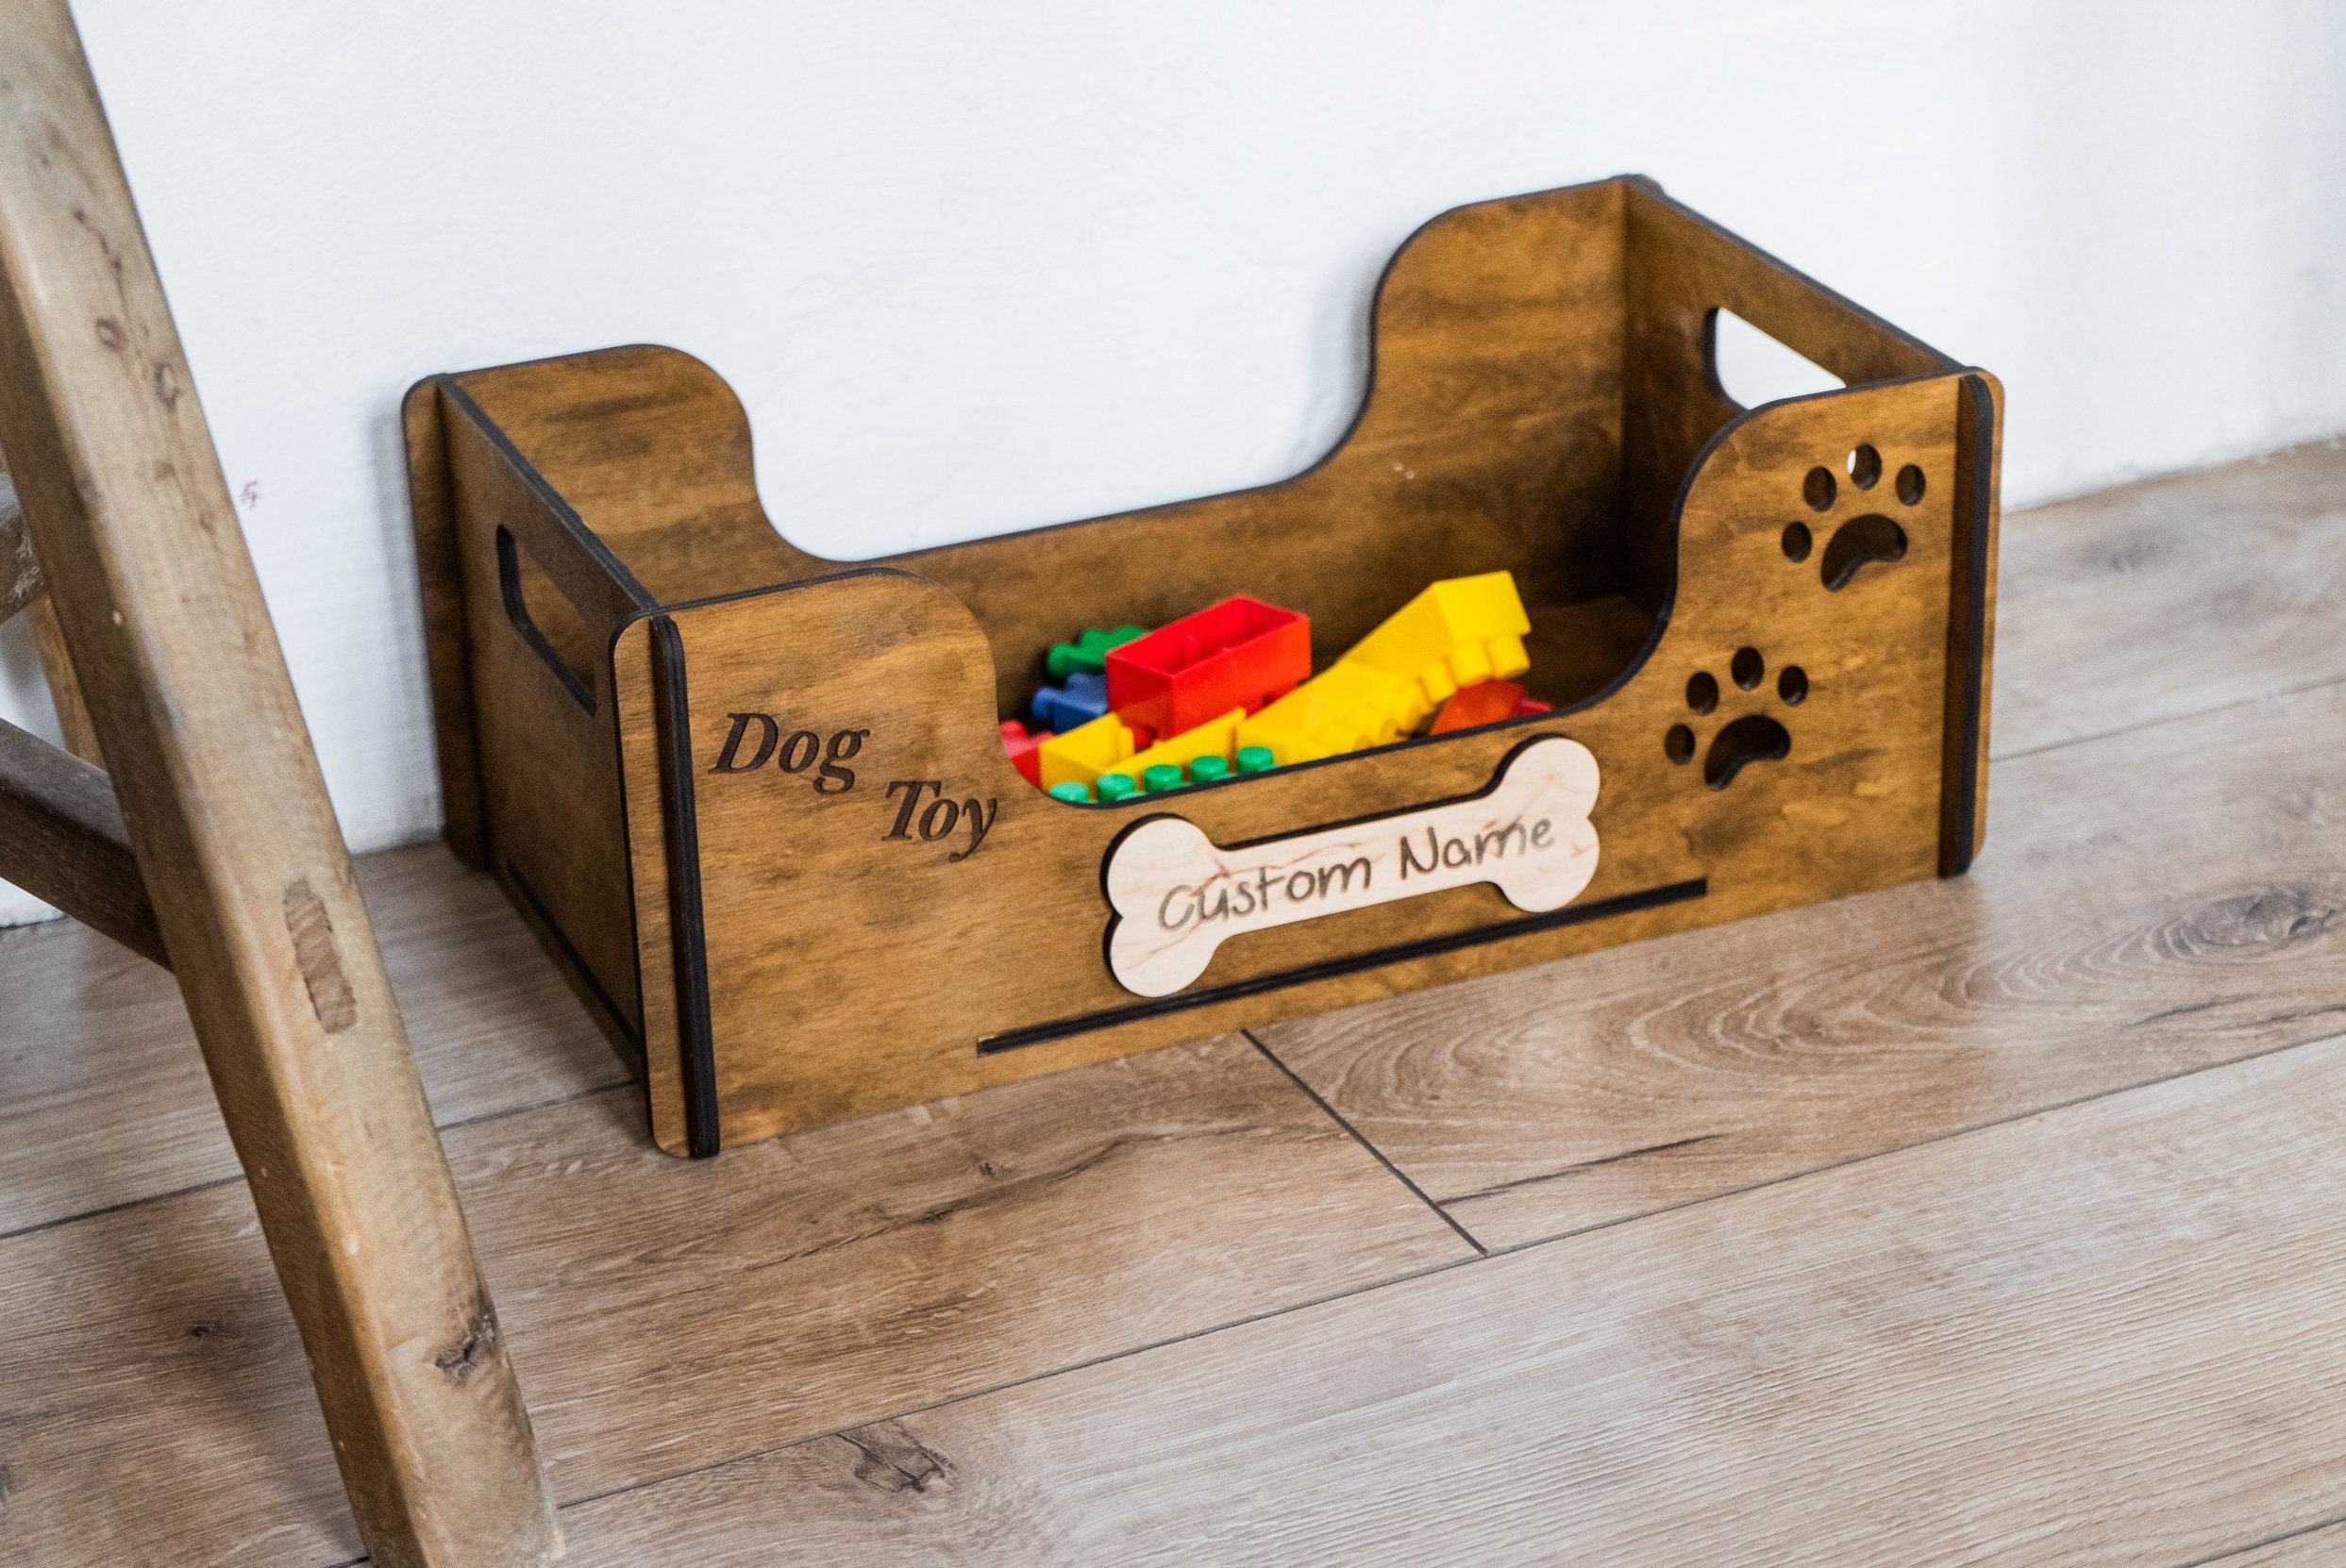 babepet wooden dog toy box, pet Food Box wooden storage crates，suitable for  storing cat and dog toys, dog clothes, pet snacks and pet supplies-Natural